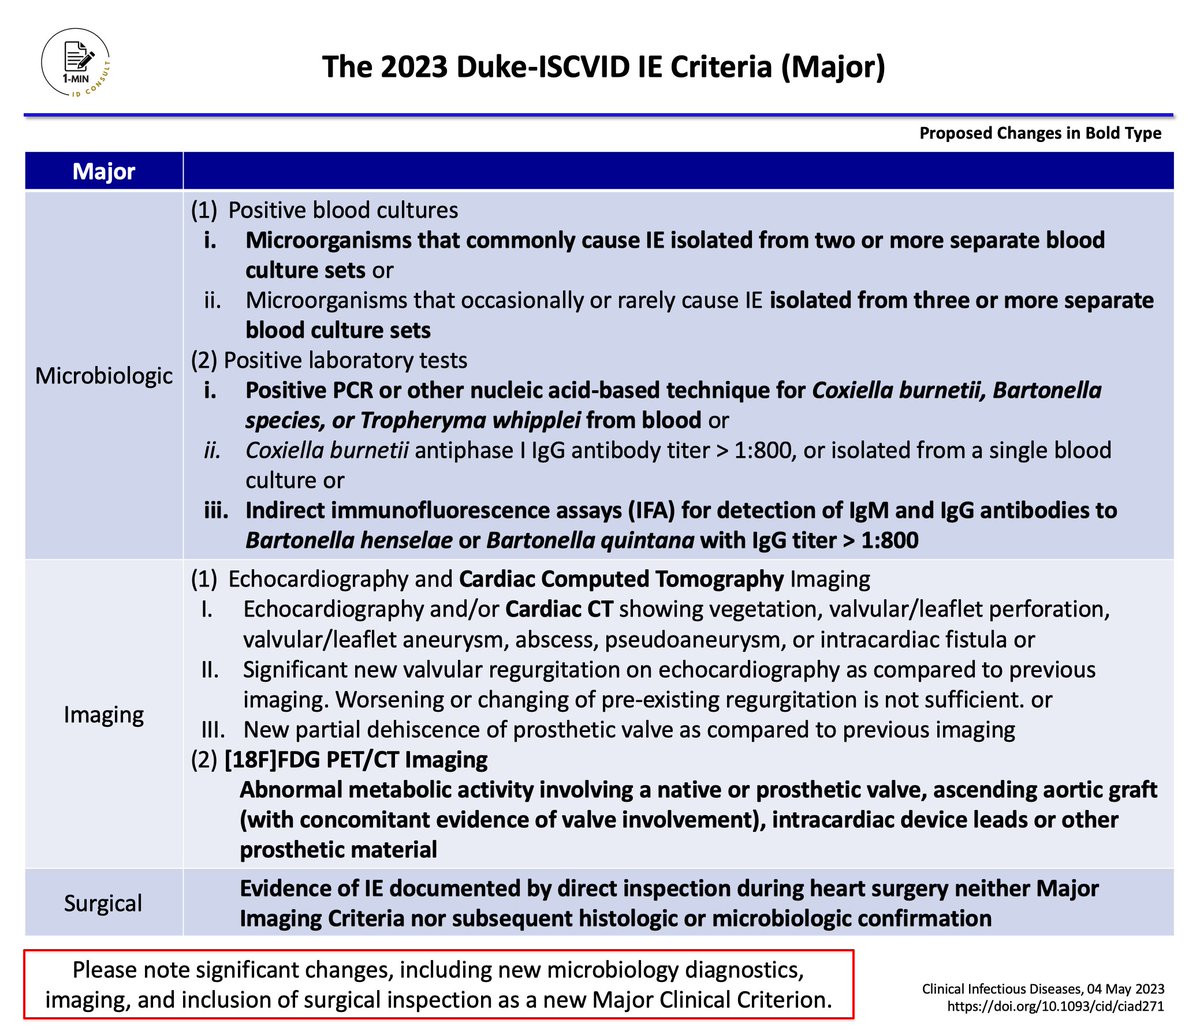 【The 2023 Duke-ISCVID IE Criteria (Major)】 Please note significant changes, including new microbiology diagnostics, imaging, and inclusion of surgical inspection as a new major clinical criterion! Level: Intermediate Importance: ★★★ #IDTwitter #IDMedEd #IDFellow #MedEd